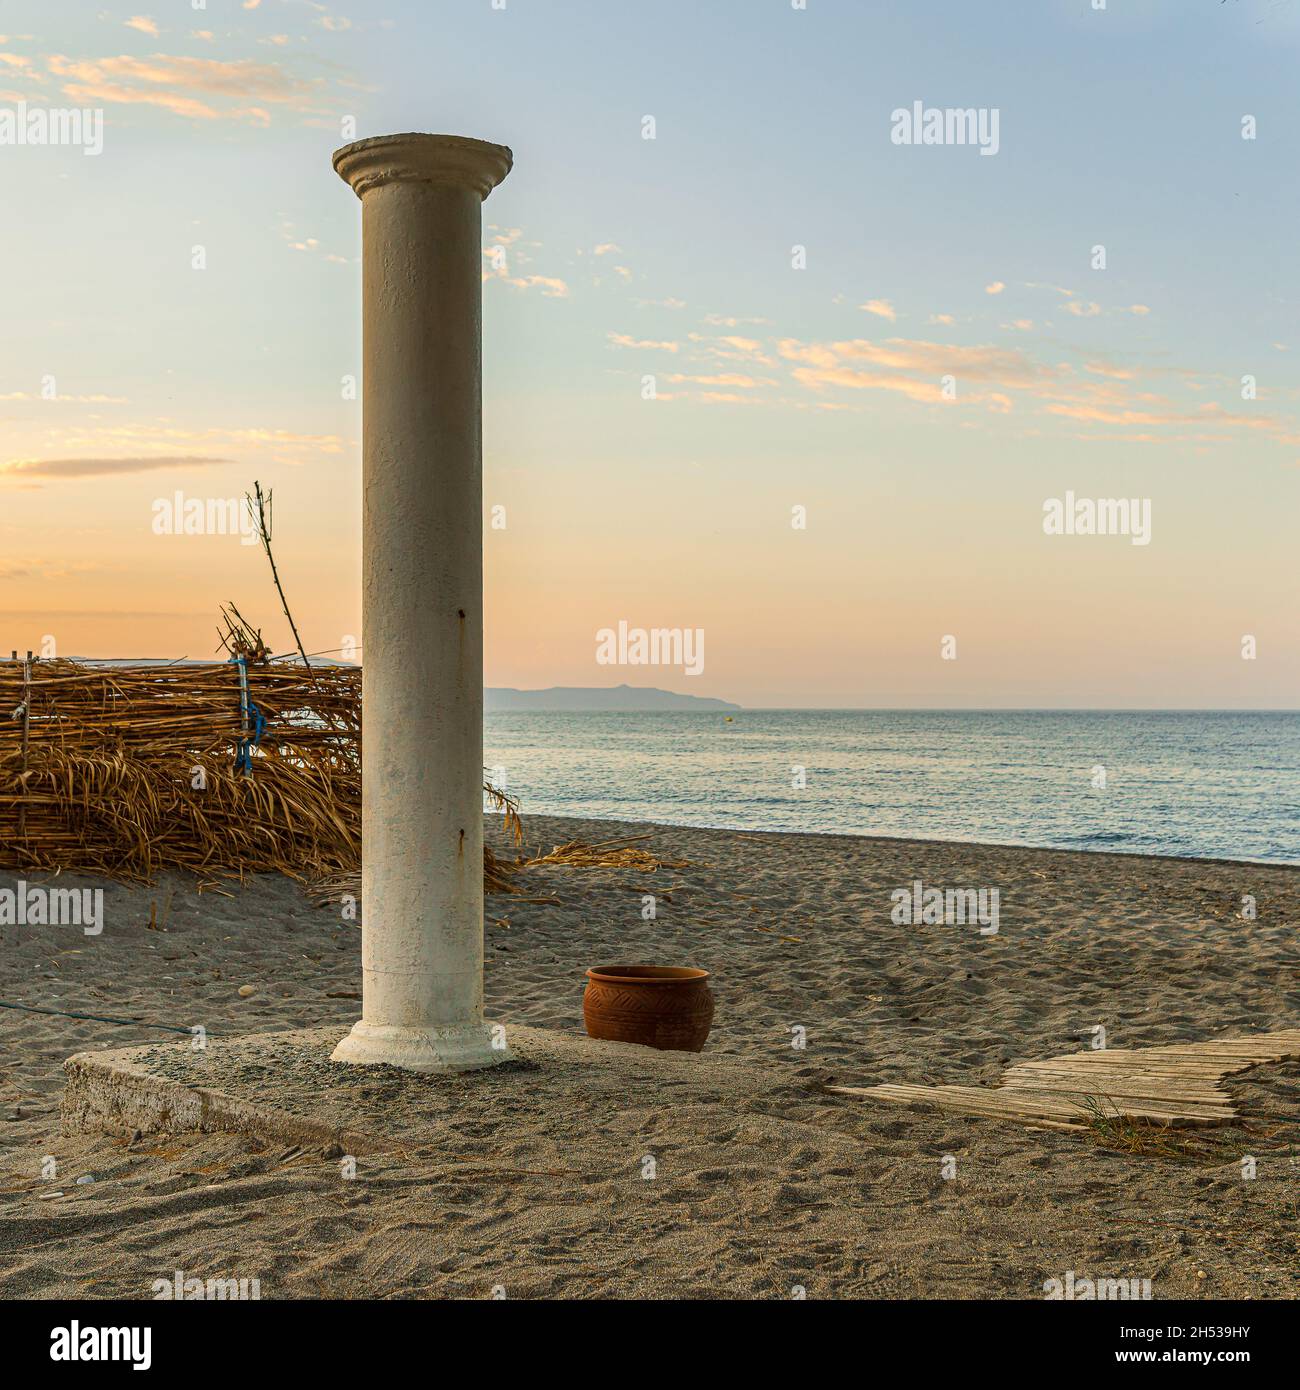 a solitary column standing by the beach in the island of Crete, Platanias, Crete, Greece, October 11, 2021 Stock Photo